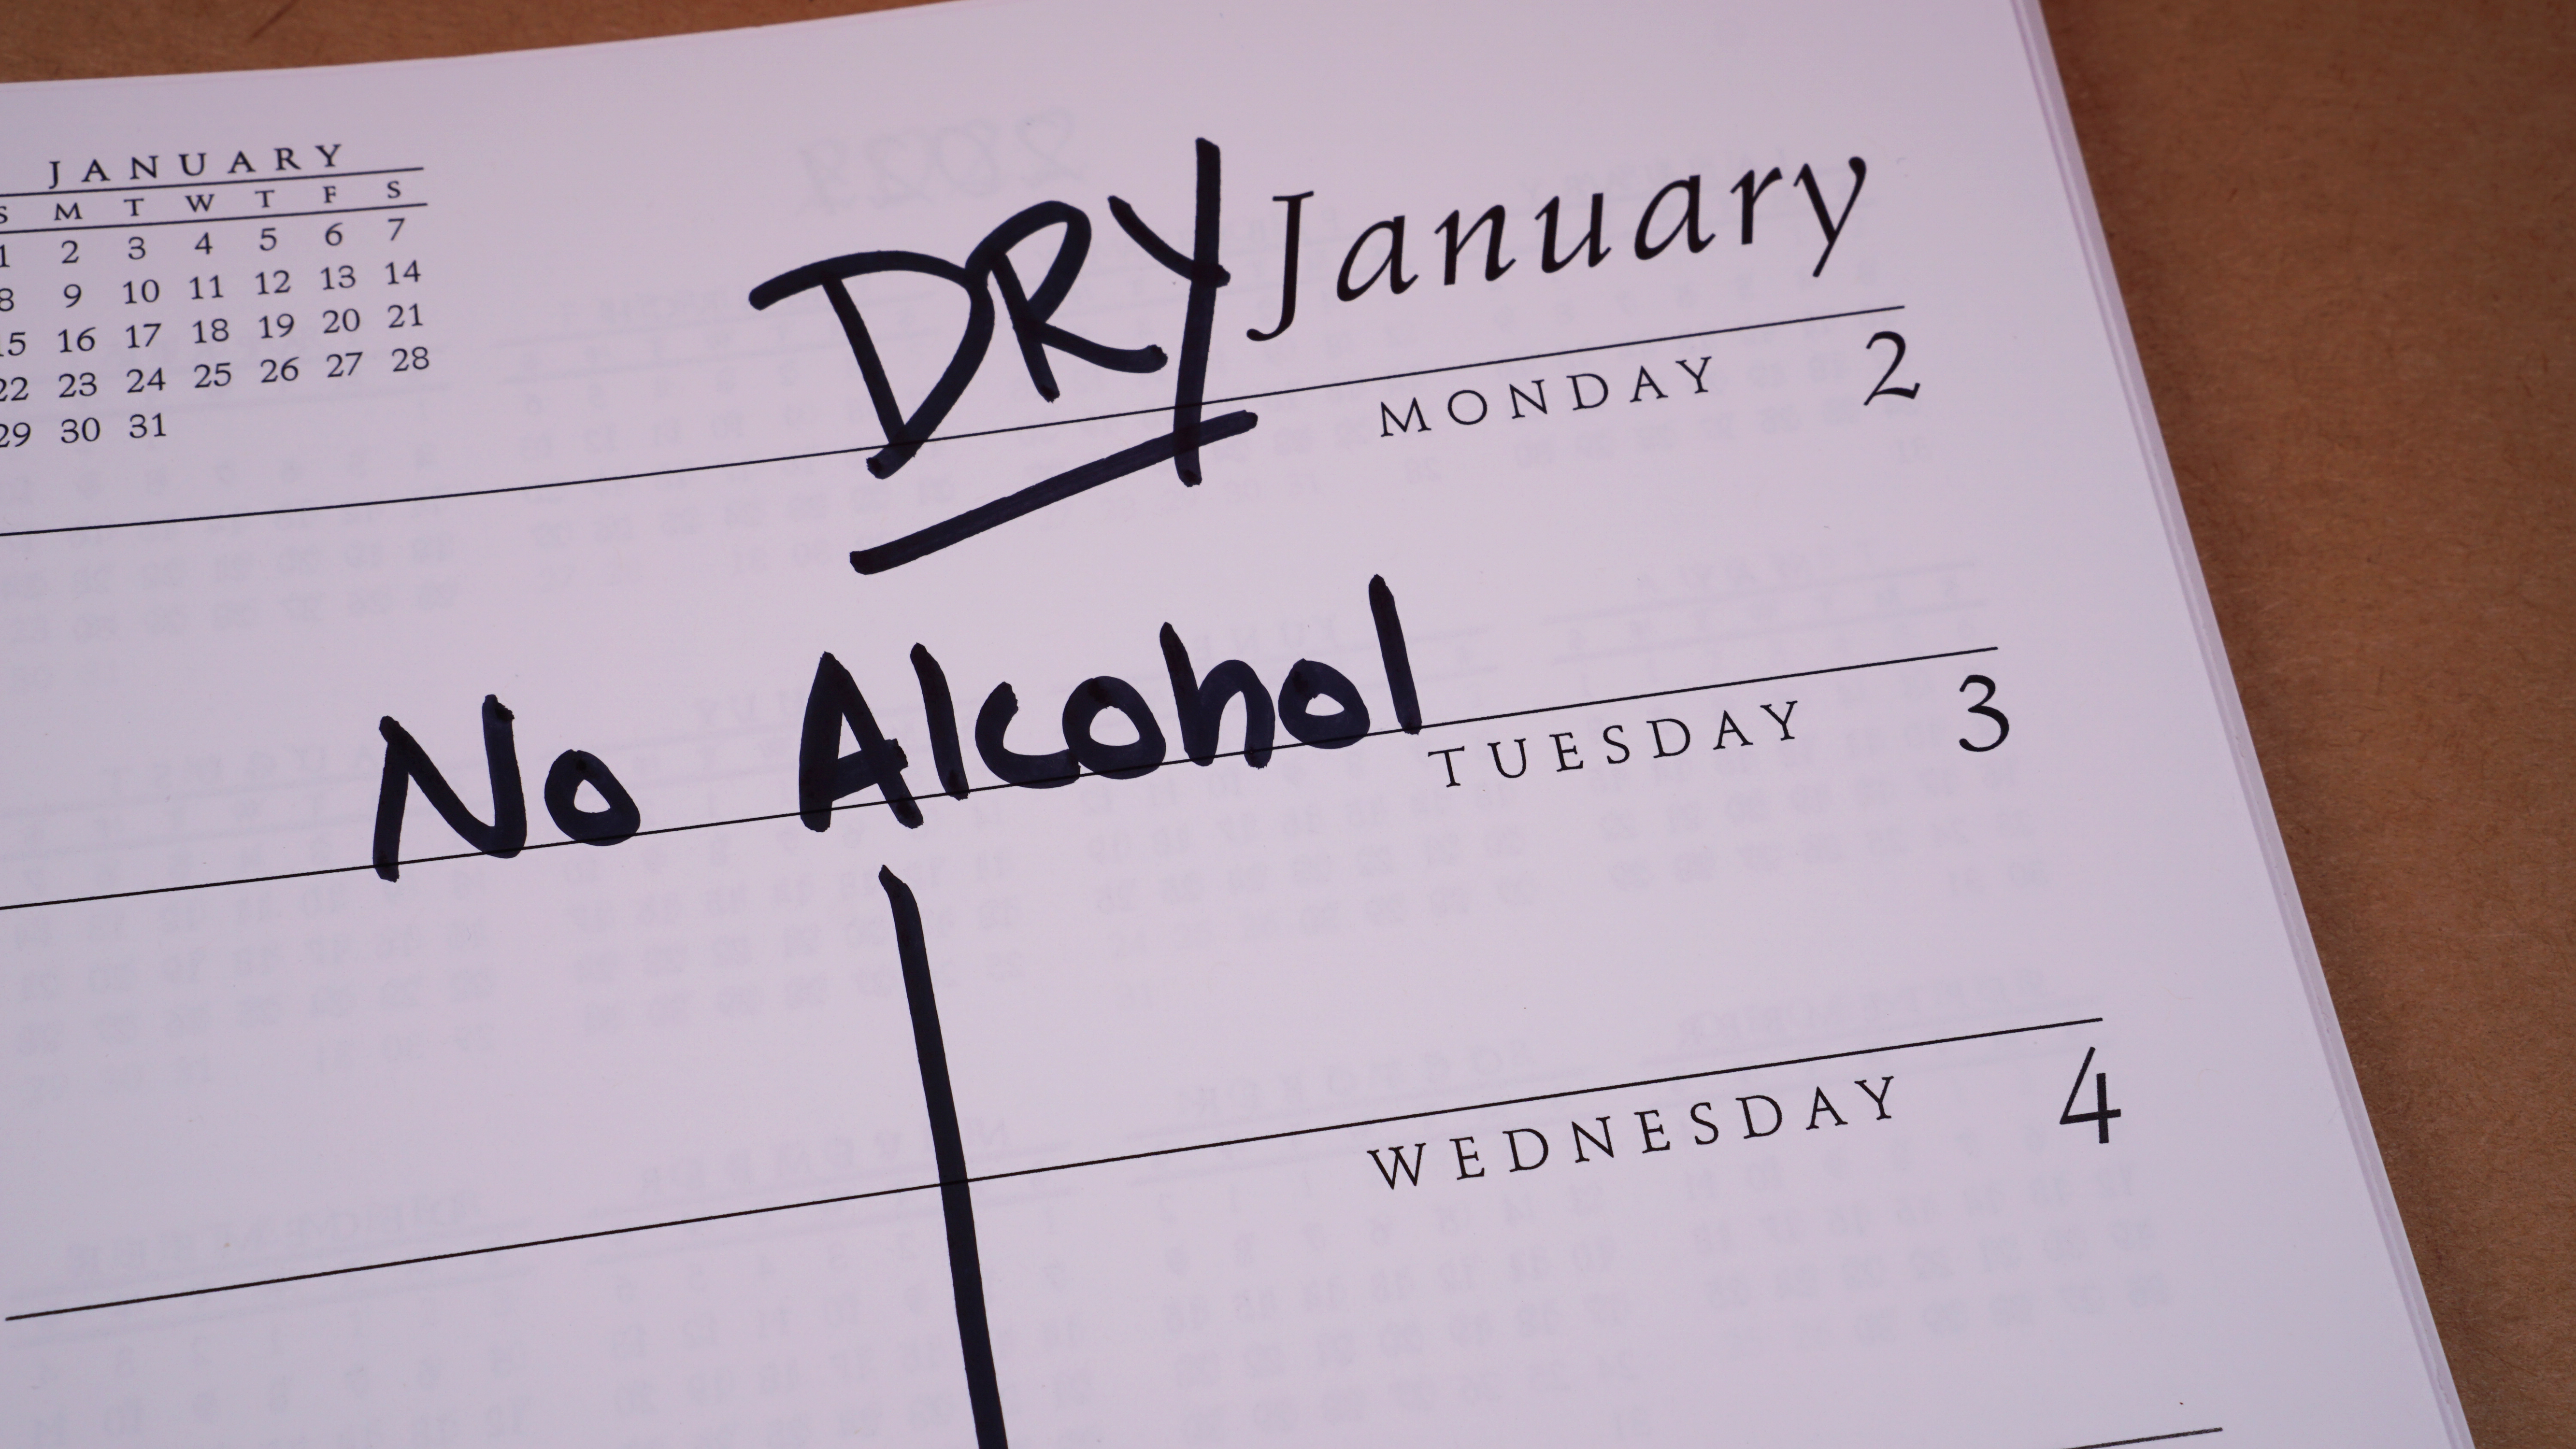 Local dietitian describes benefits to having a  'dry January'